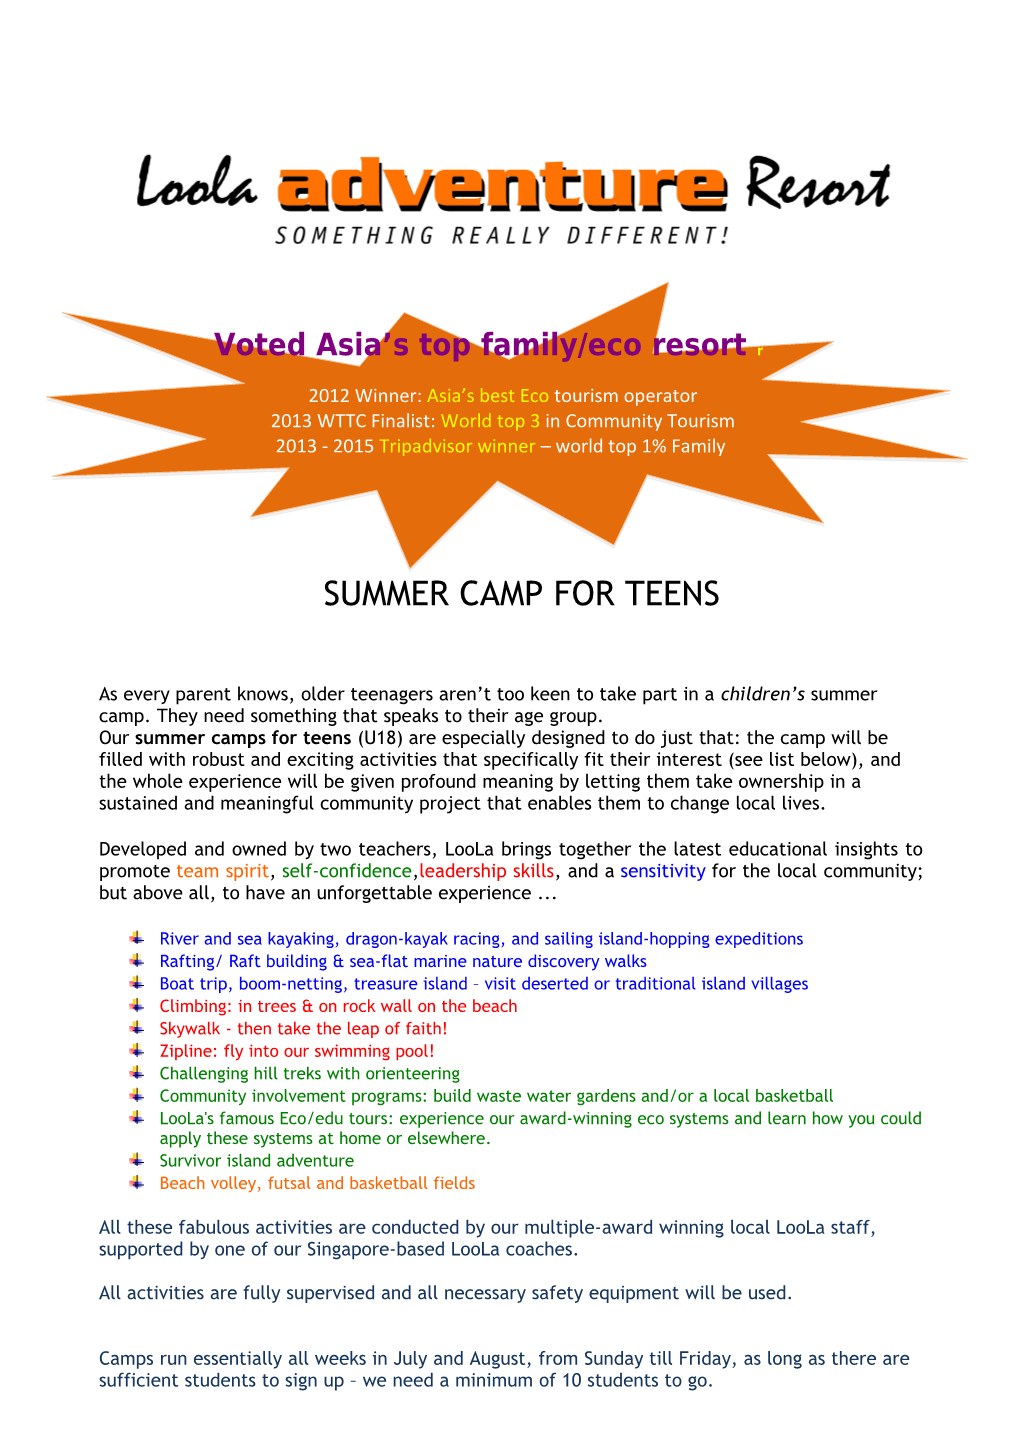 Summer Camp for Teens